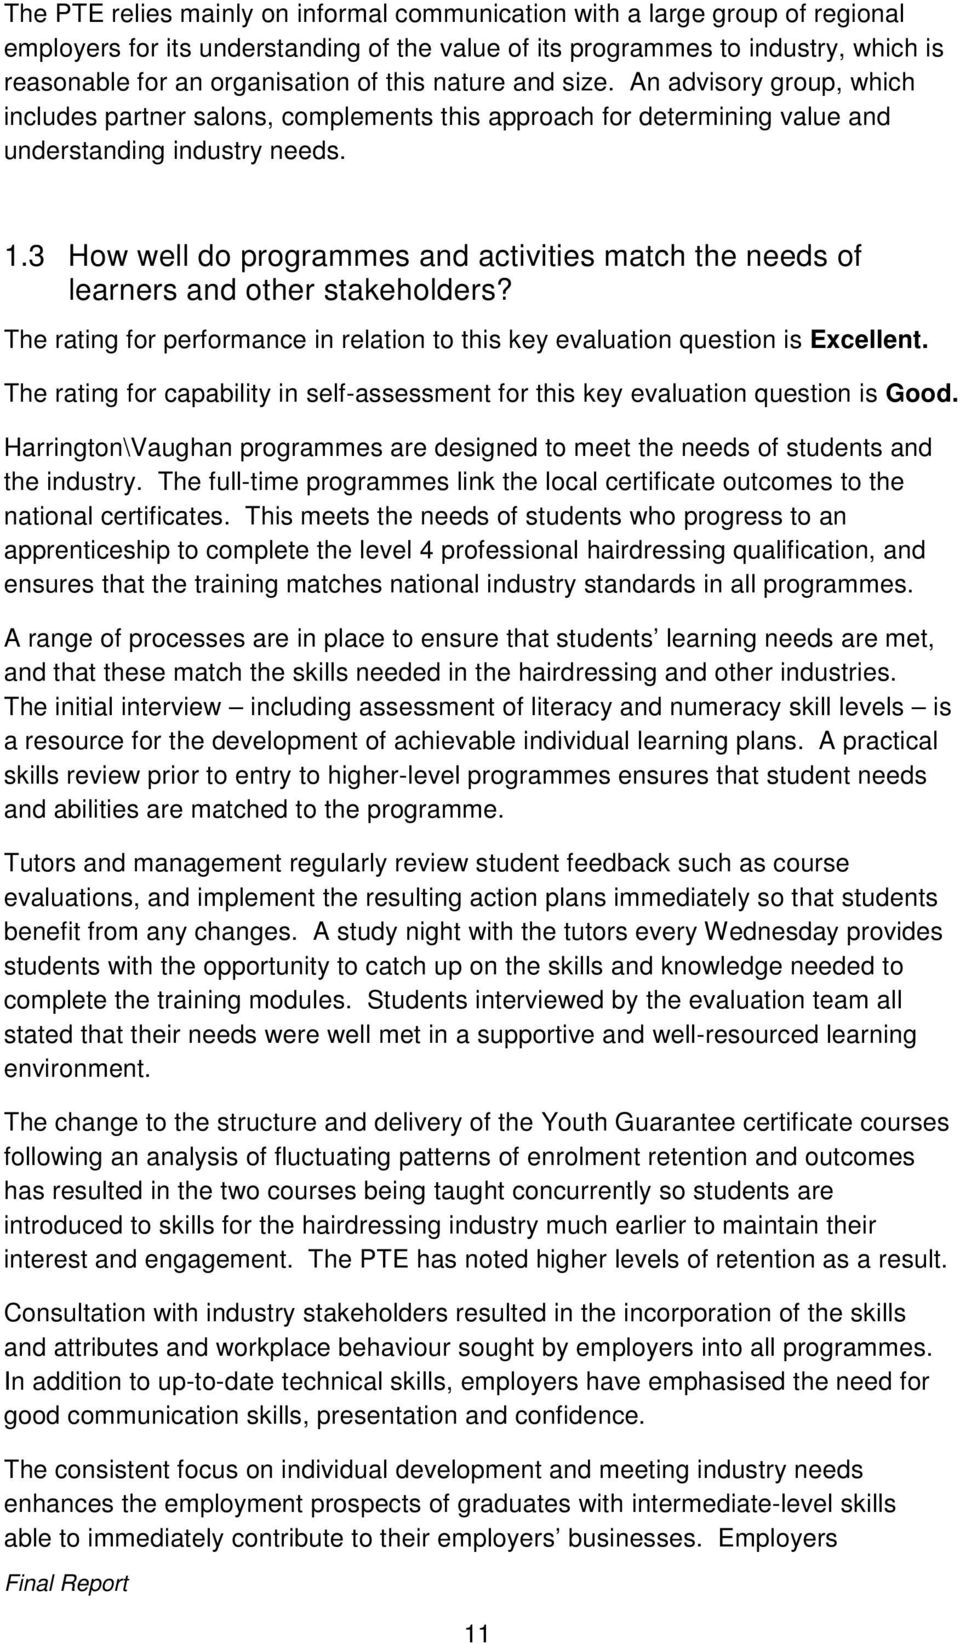 3 How well do programmes and activities match the needs of learners and other stakeholders? The rating for performance in relation to this key evaluation question is Excellent.